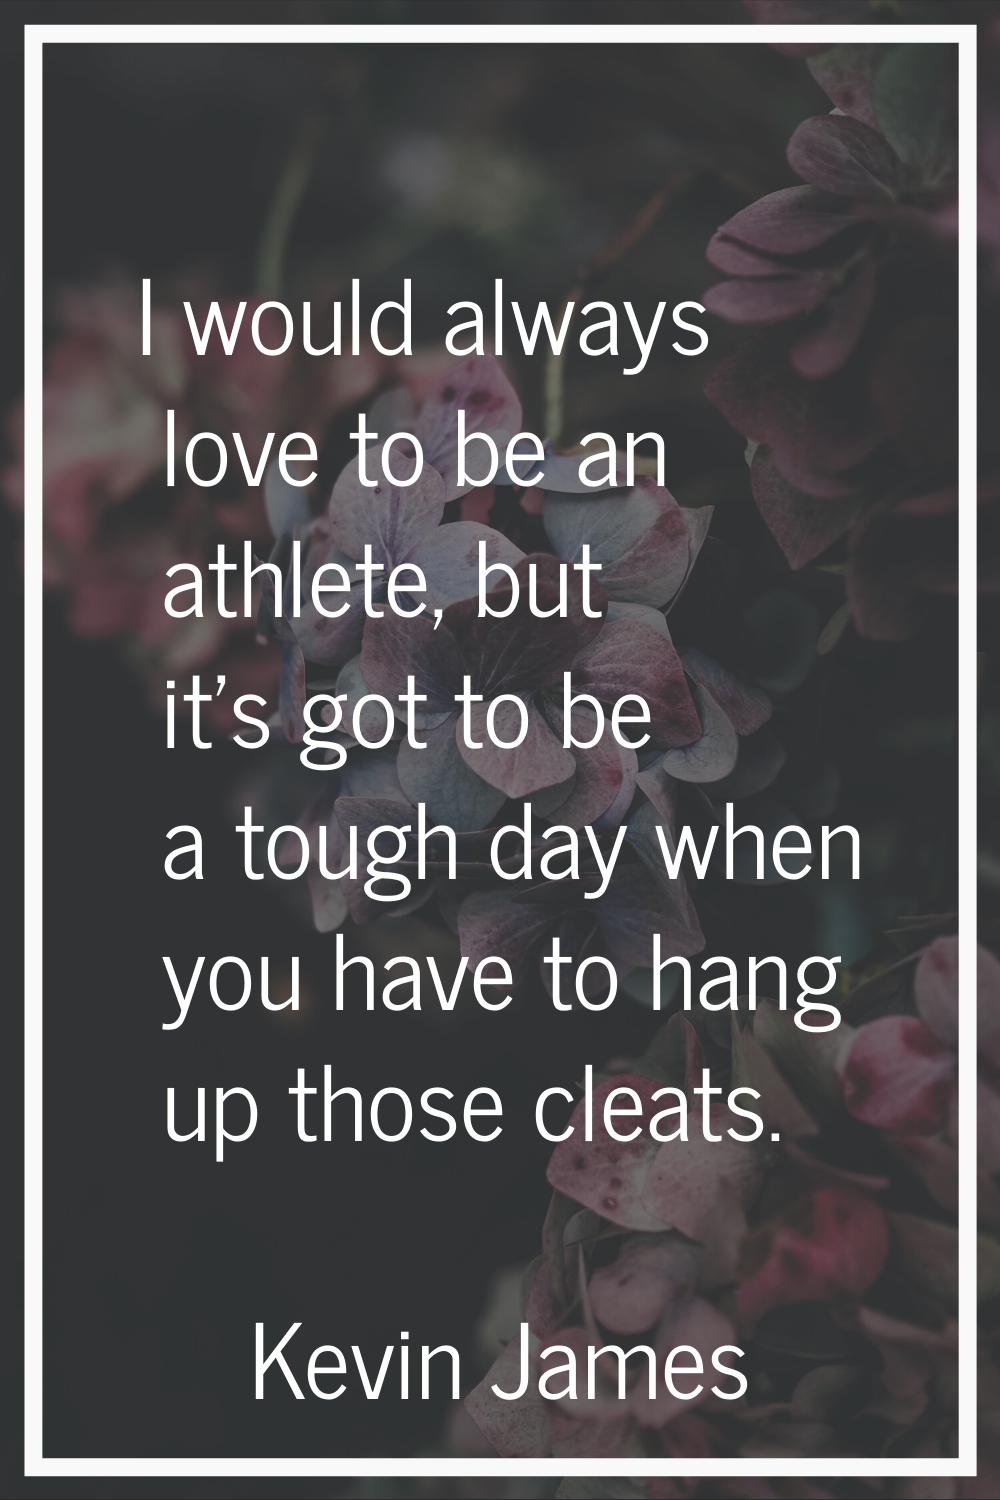 I would always love to be an athlete, but it's got to be a tough day when you have to hang up those